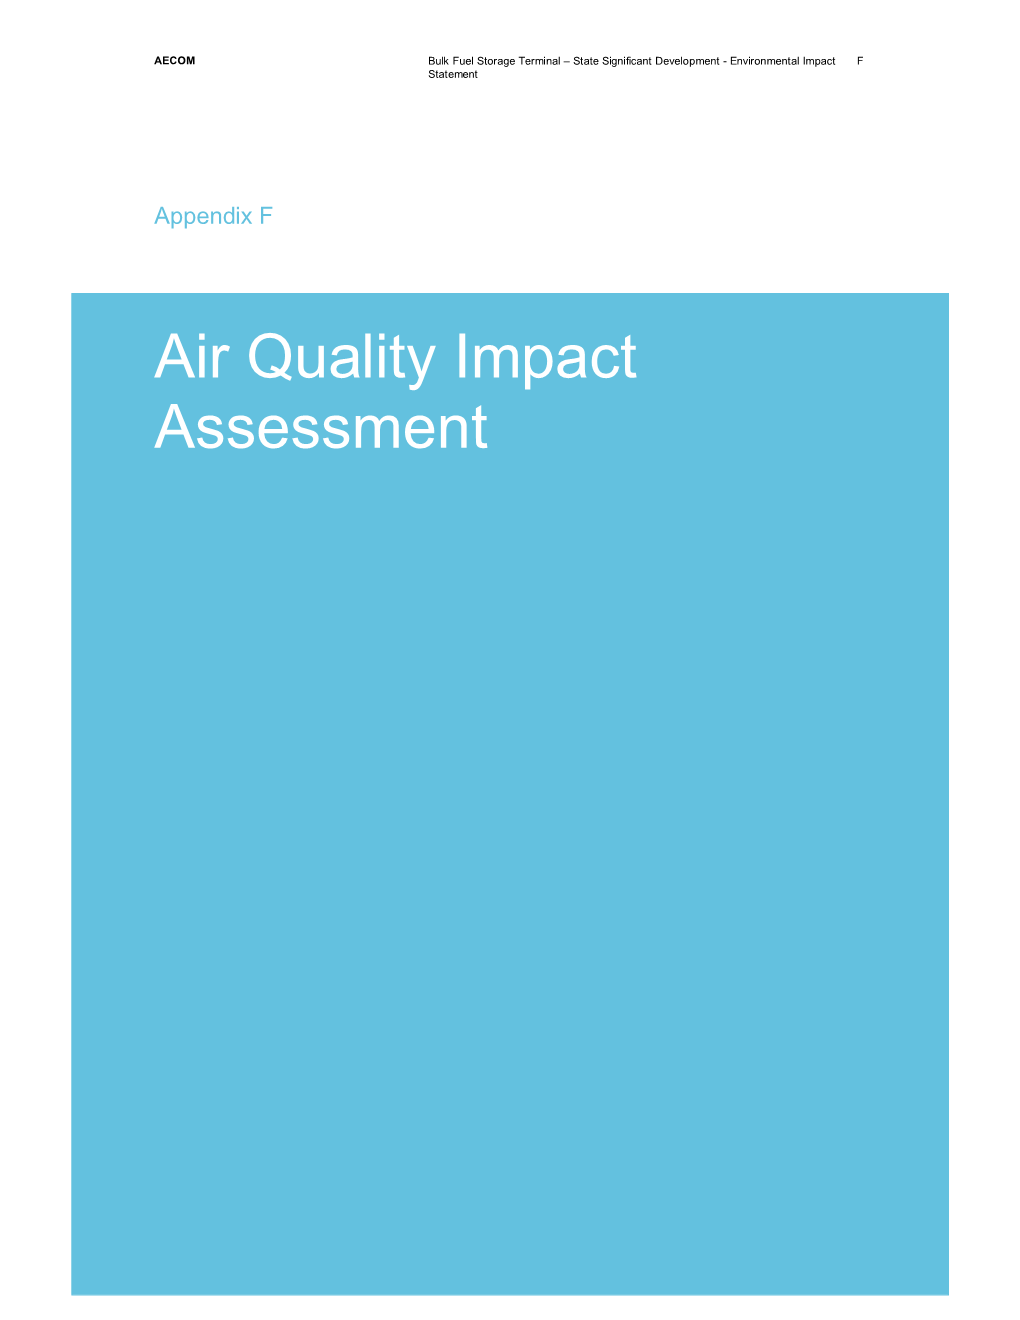 Air Quality Impact Assessment